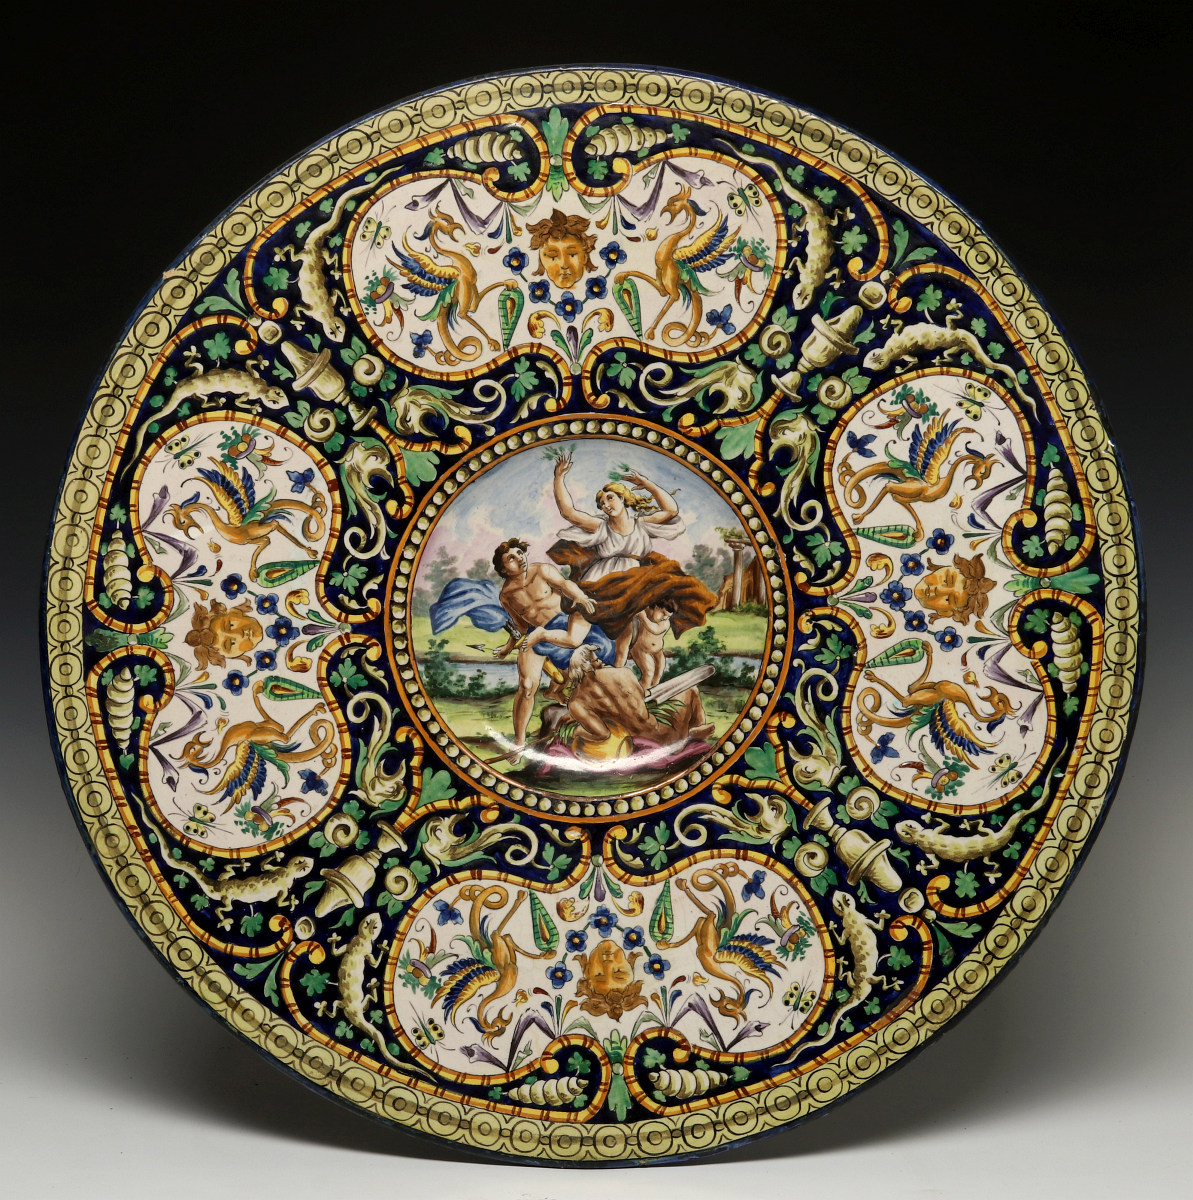 A MIDDLE 19TH CEN ITALIAN MAIOLICA FAIENCE CHARGER